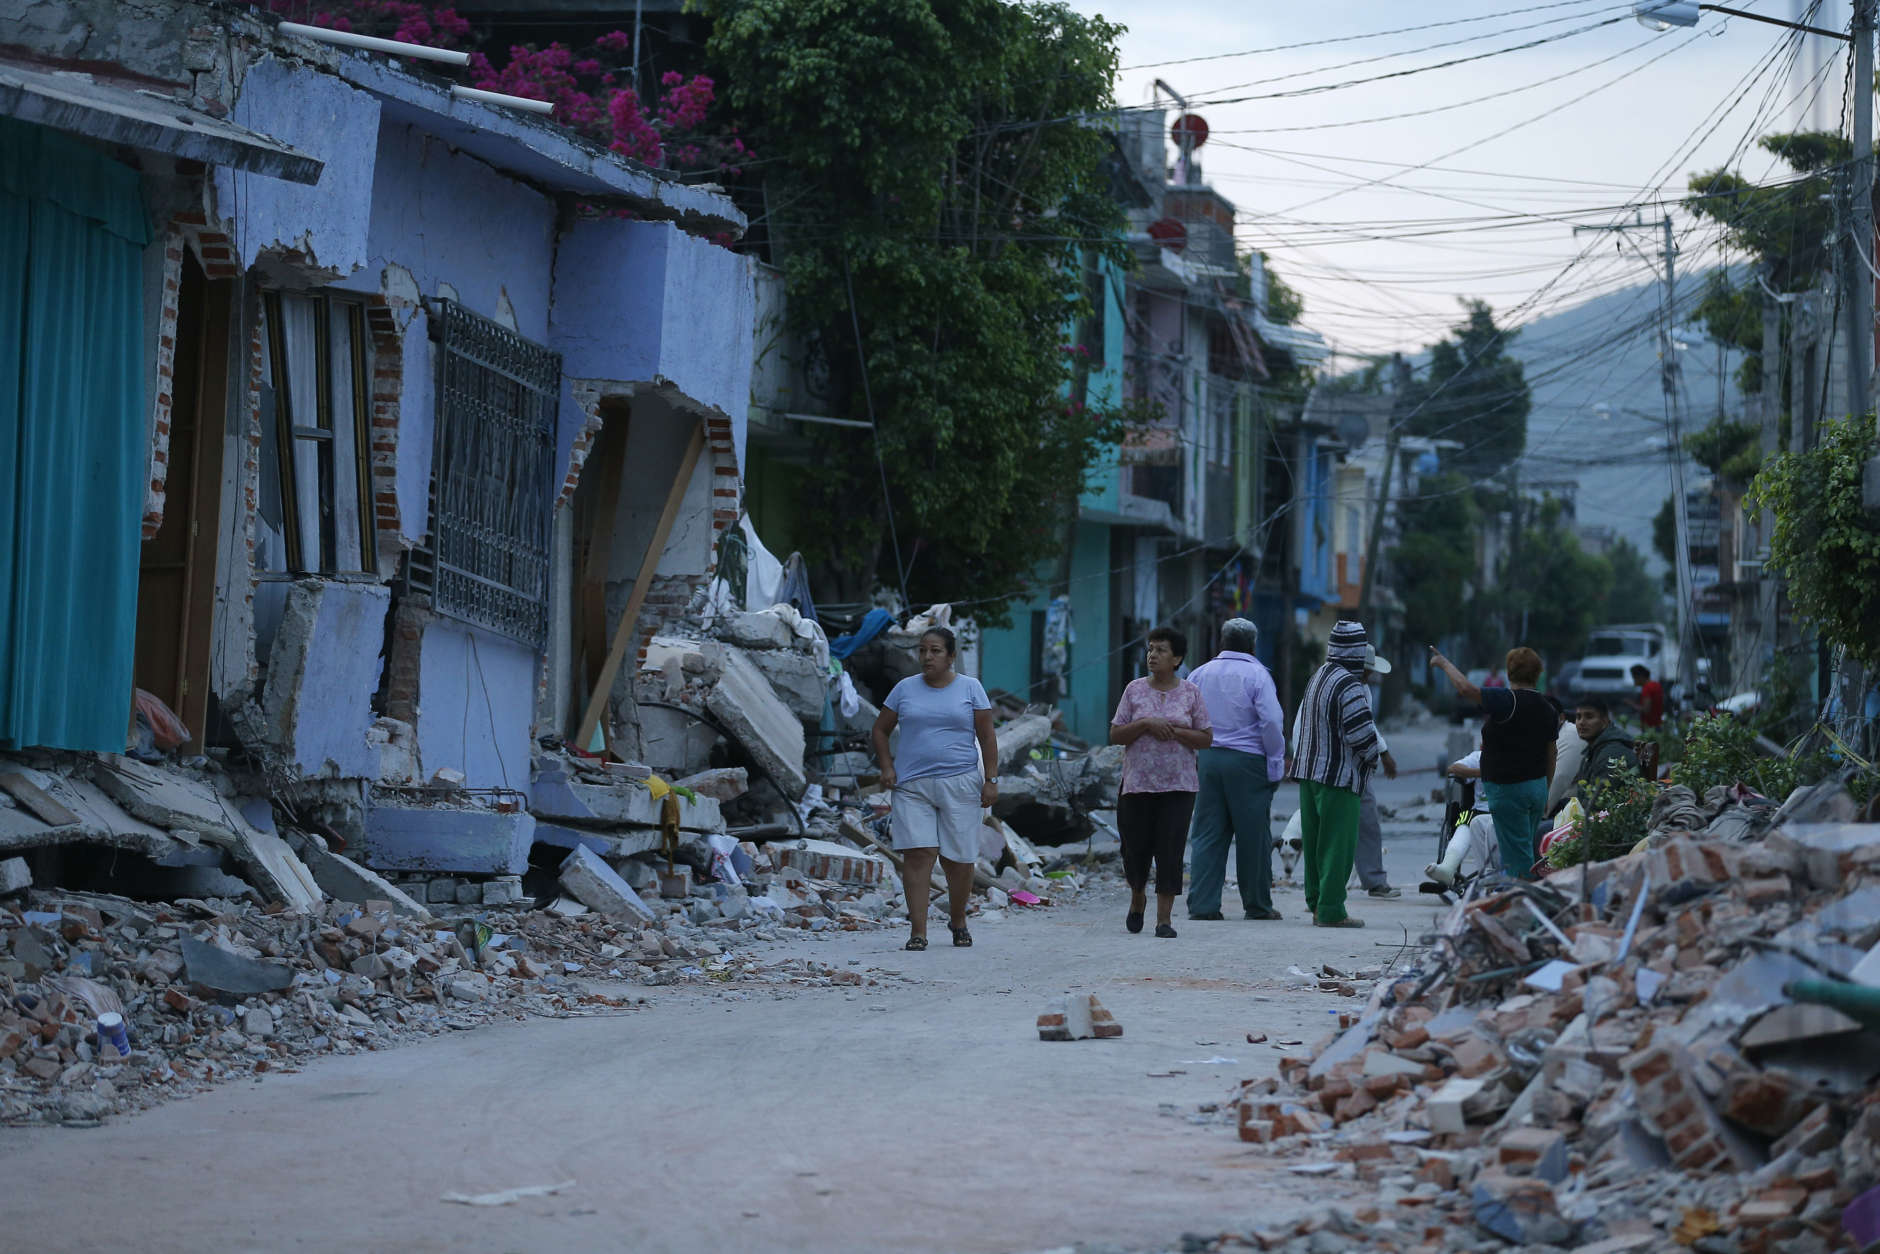 Residents stand next to buildings damaged by a 7.1 earthquake, in Jojutla, Morelos state, Mexico, Wednesday, Sept. 20, 2017. Police, firefighters and ordinary Mexicans are digging frantically through the rubble of collapsed schools, homes and apartment buildings, looking for survivors of Mexico's deadliest earthquake in decades as the number of confirmed fatalities climbed to 248. (AP Photo/Eduardo Verdugo)